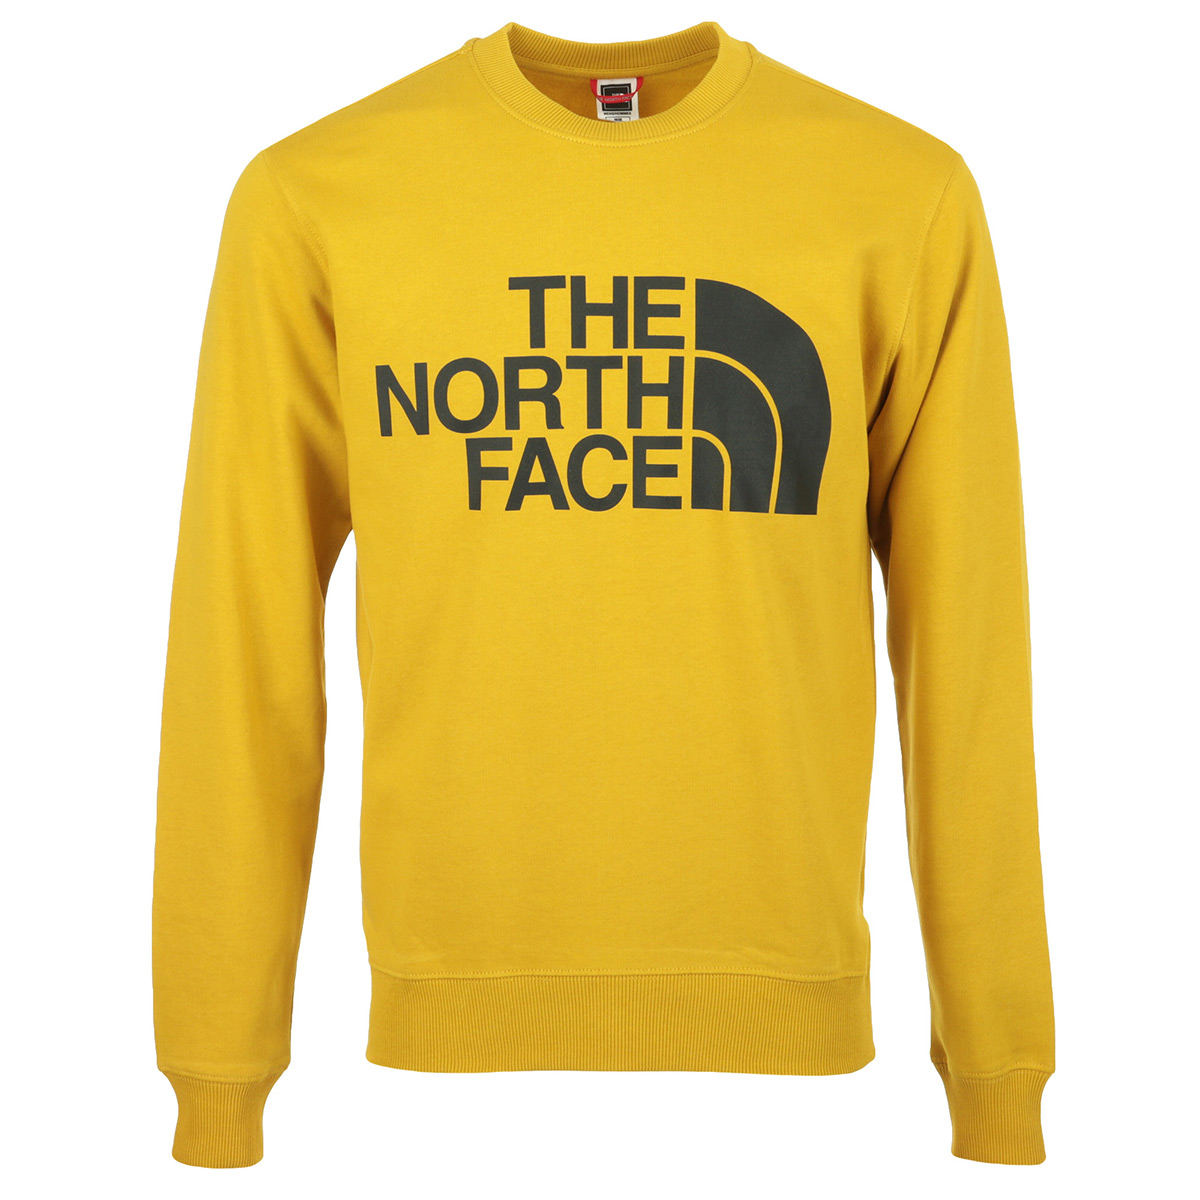 The North Face "Standard Crew"